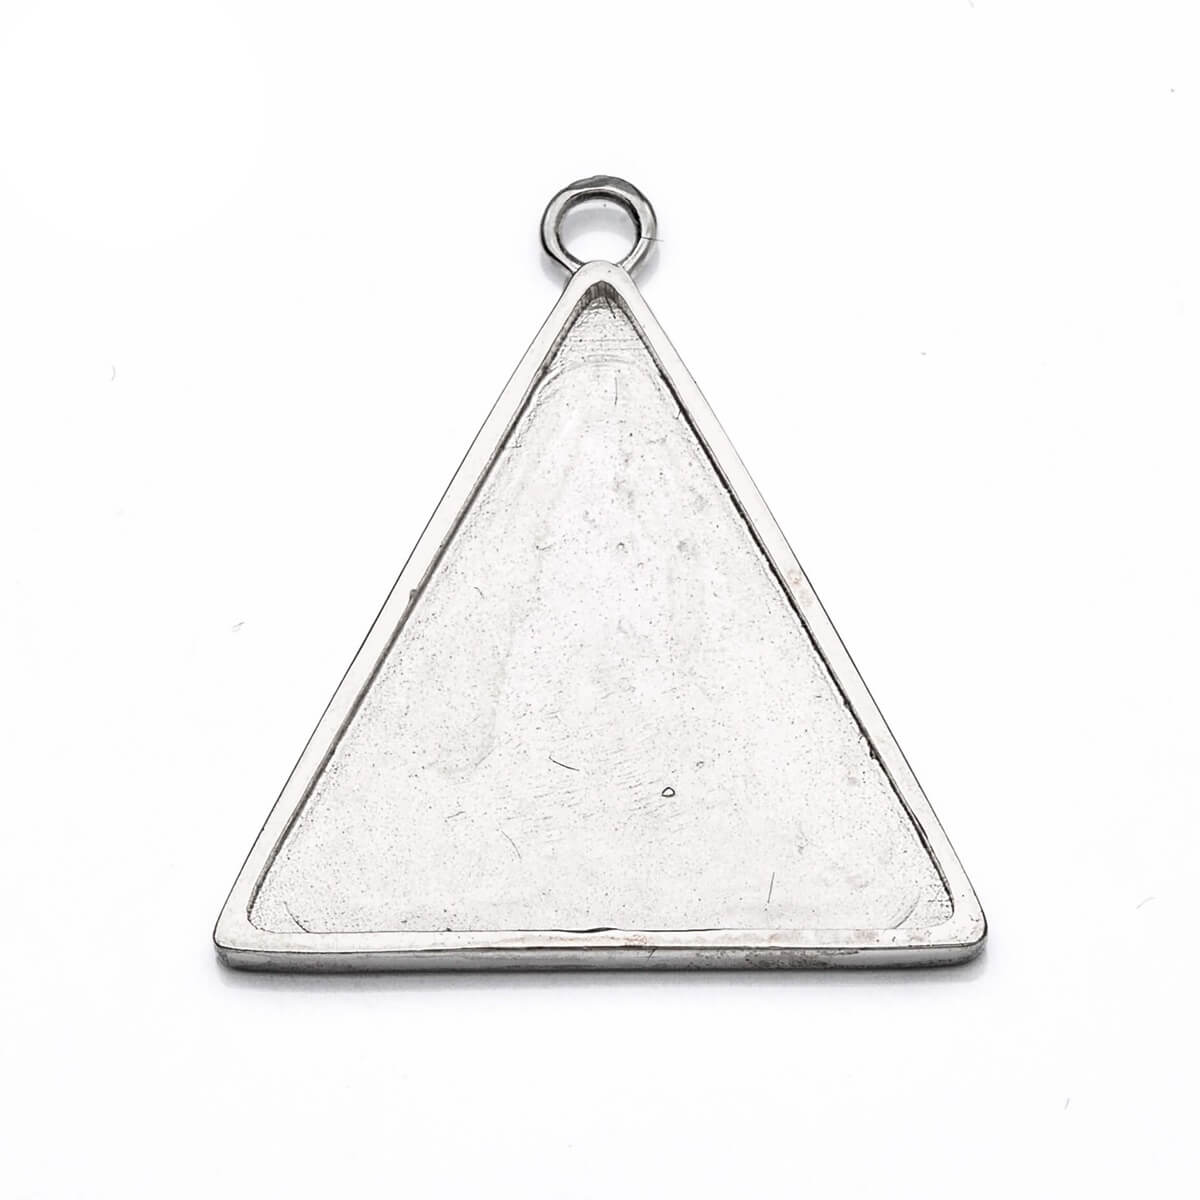 Triangular Pendant with Triangular Bezel Mounting in Sterling Silver 23x23x21mm 